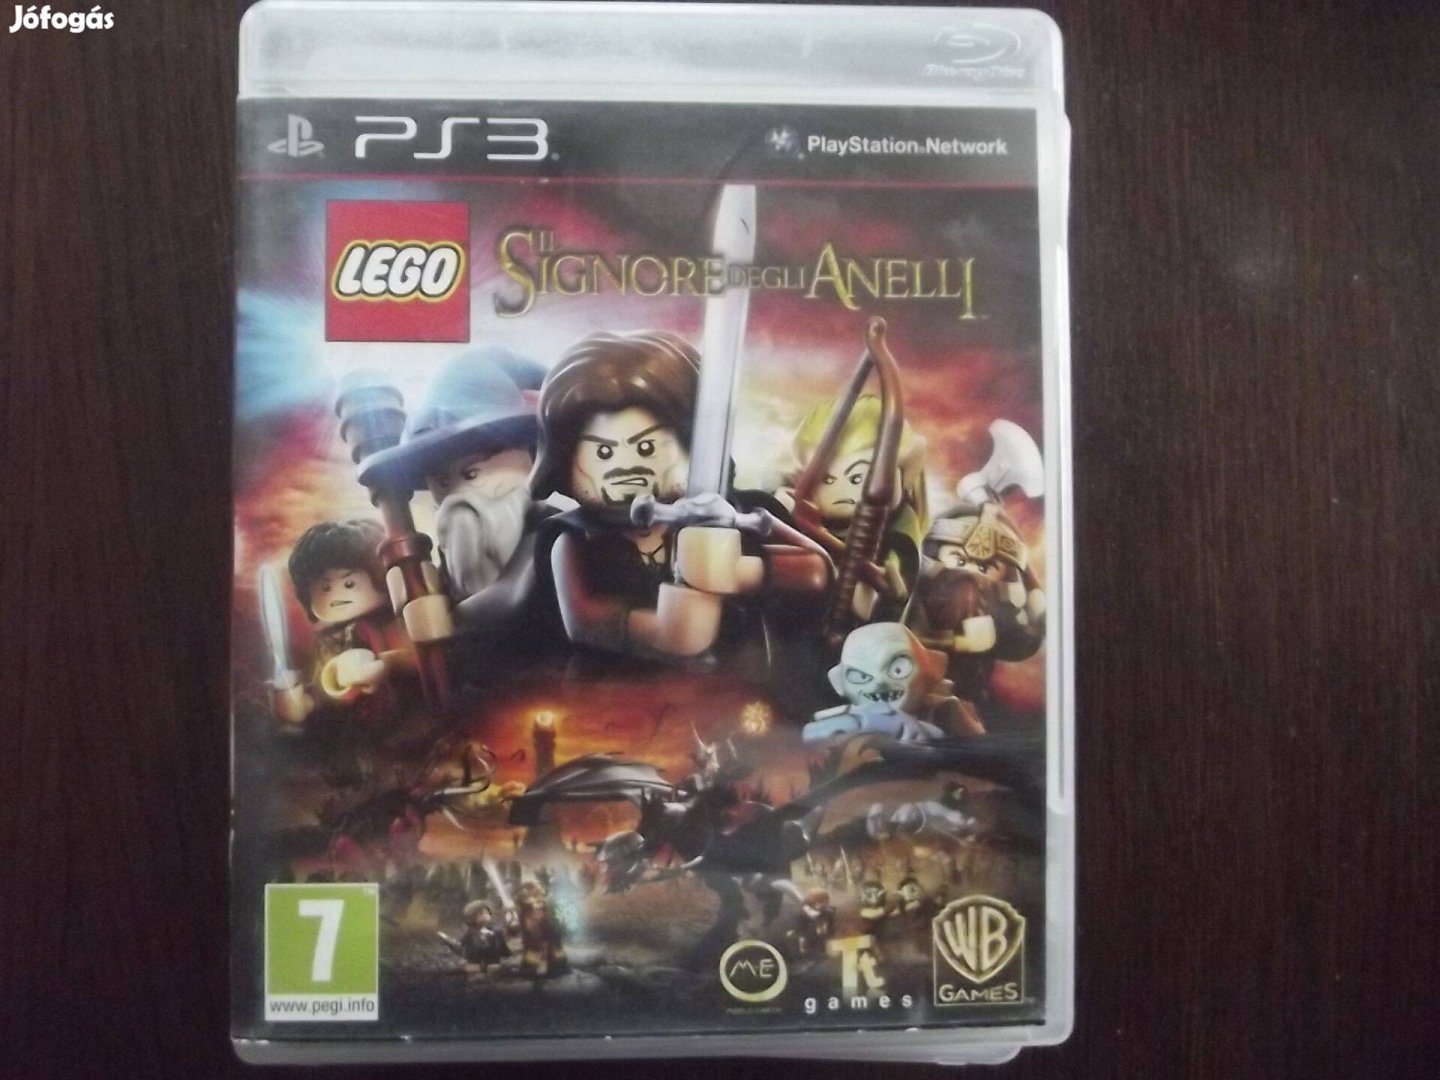 Ps3-100 Ps3 Eredeti Játék : Lego The Lord of The Rings ( karcmentes)